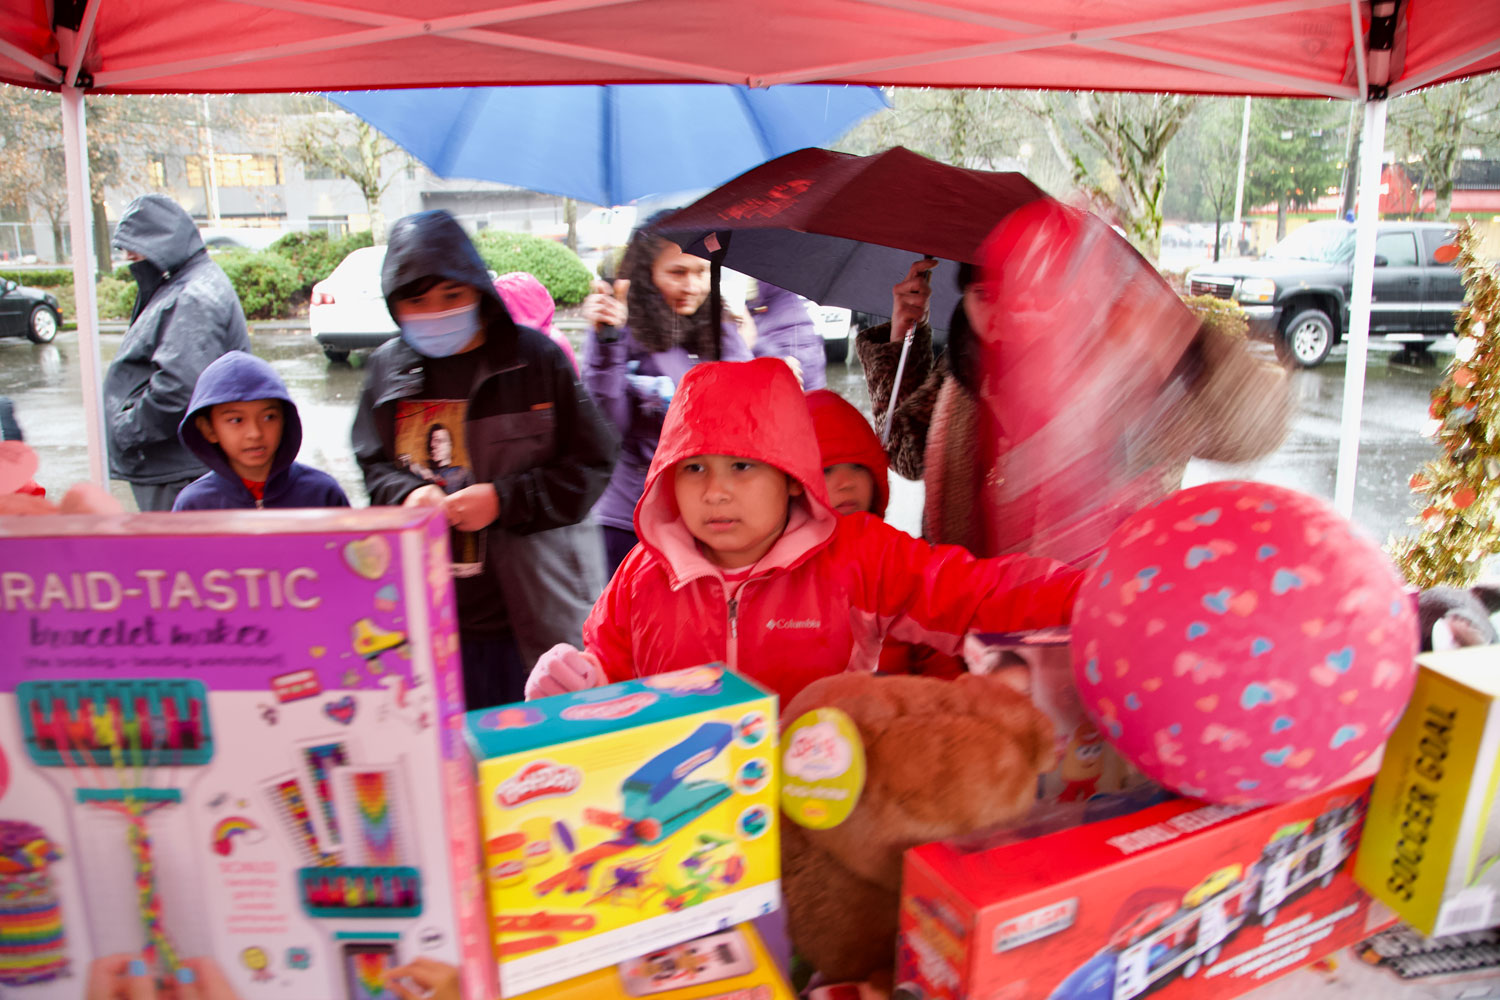 Kids with raincoats next to a table full of toys